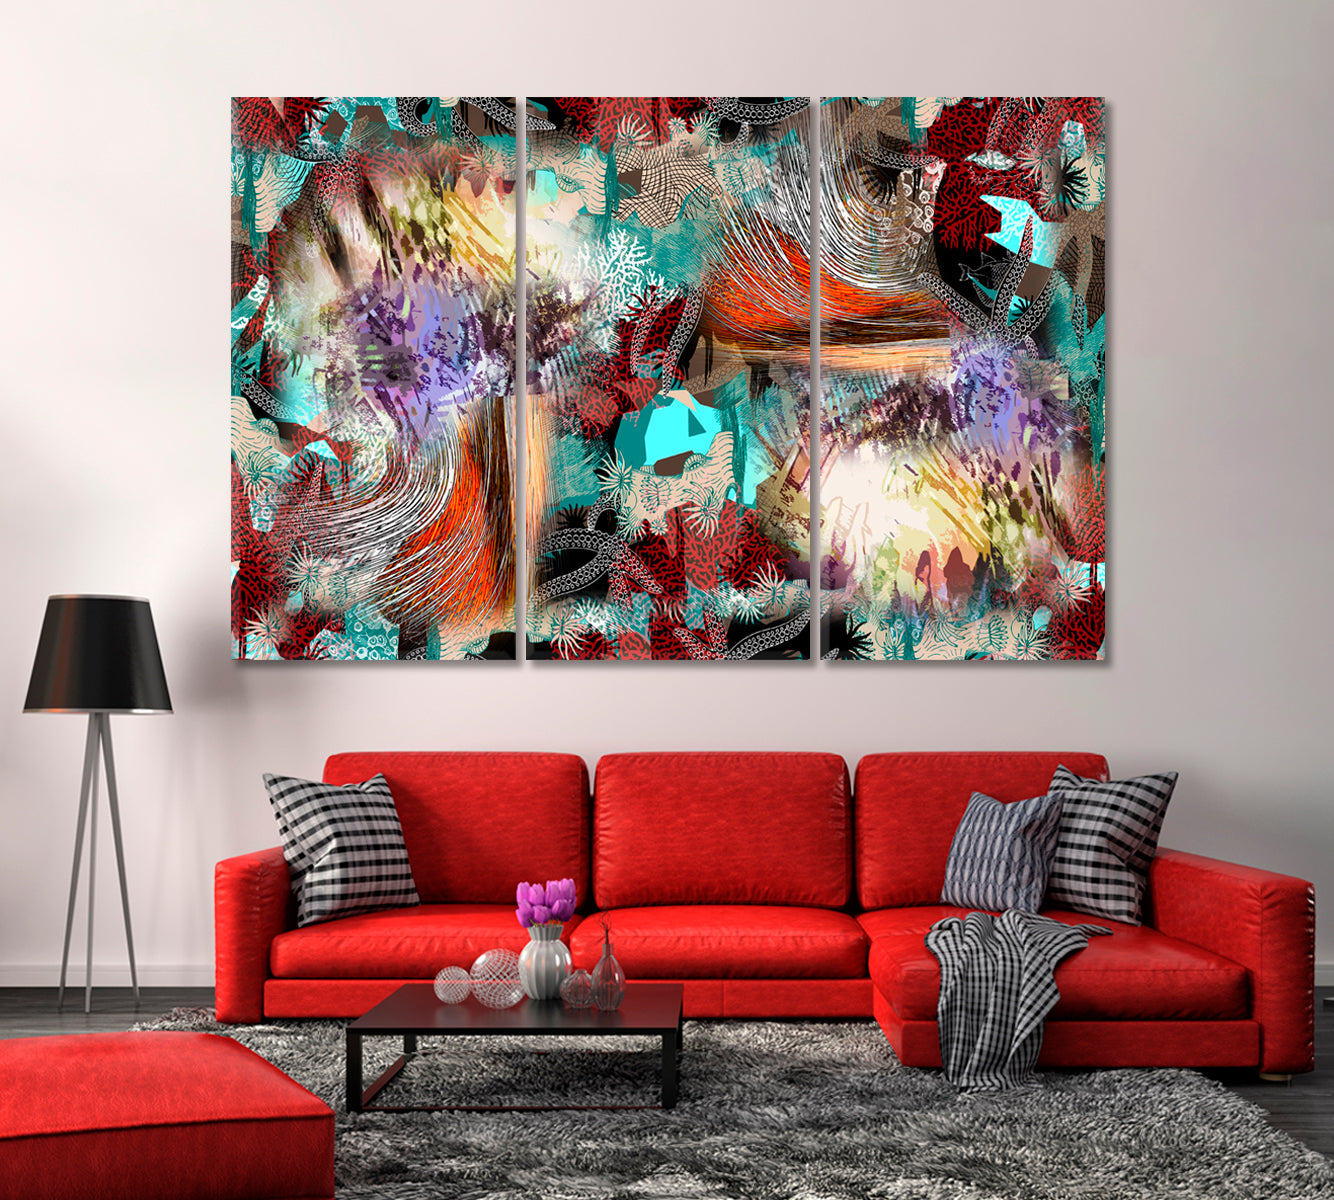 Abstract Swirls of Vibrant Colors Canvas Print-Canvas Print-CetArt-1 Panel-24x16 inches-CetArt